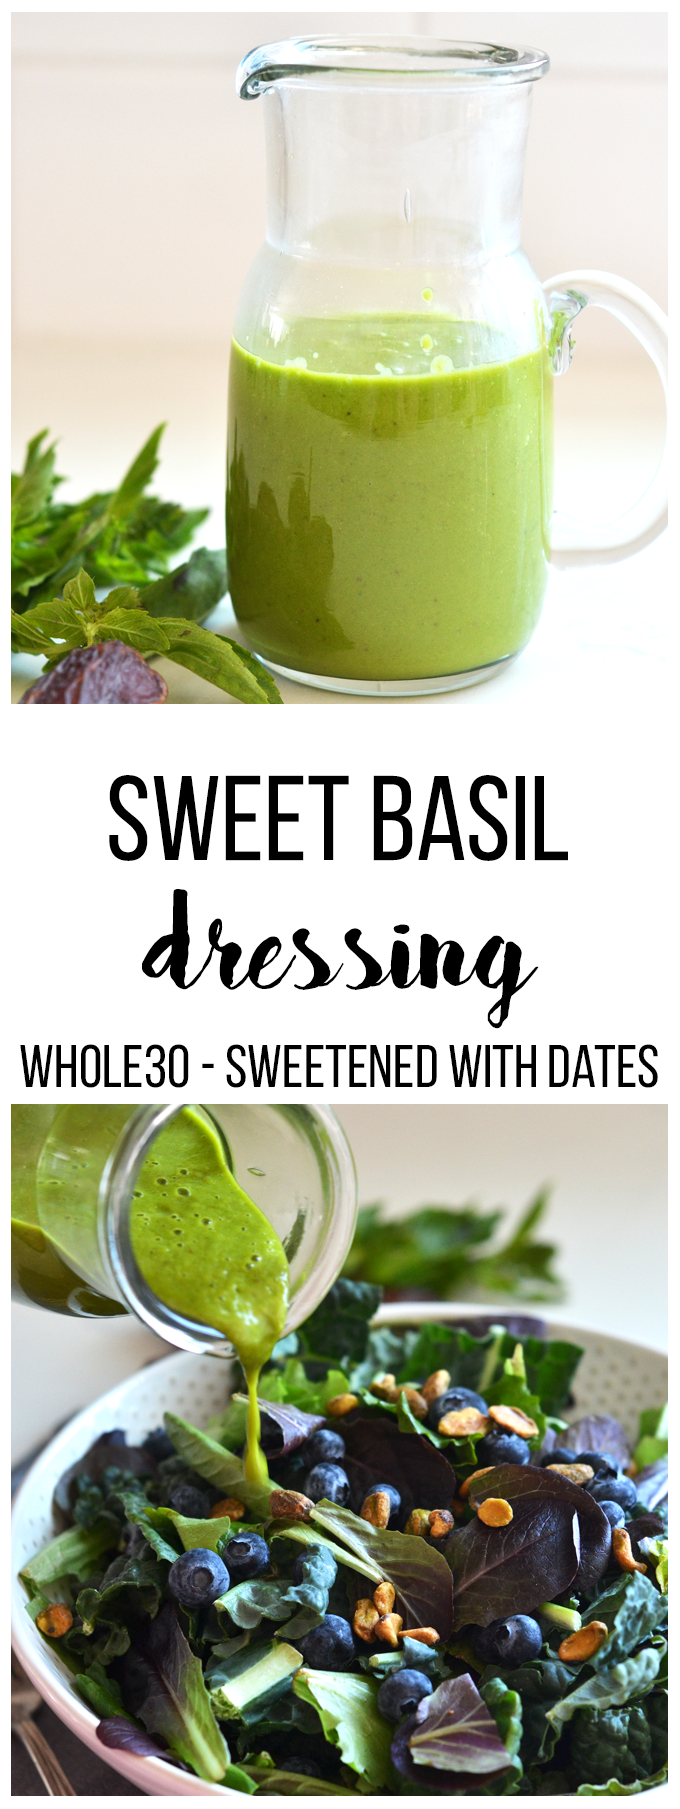 This Sweet Basil Dressing is Whole30 compliant and is naturally sweetened! Great for a summer BBQ!